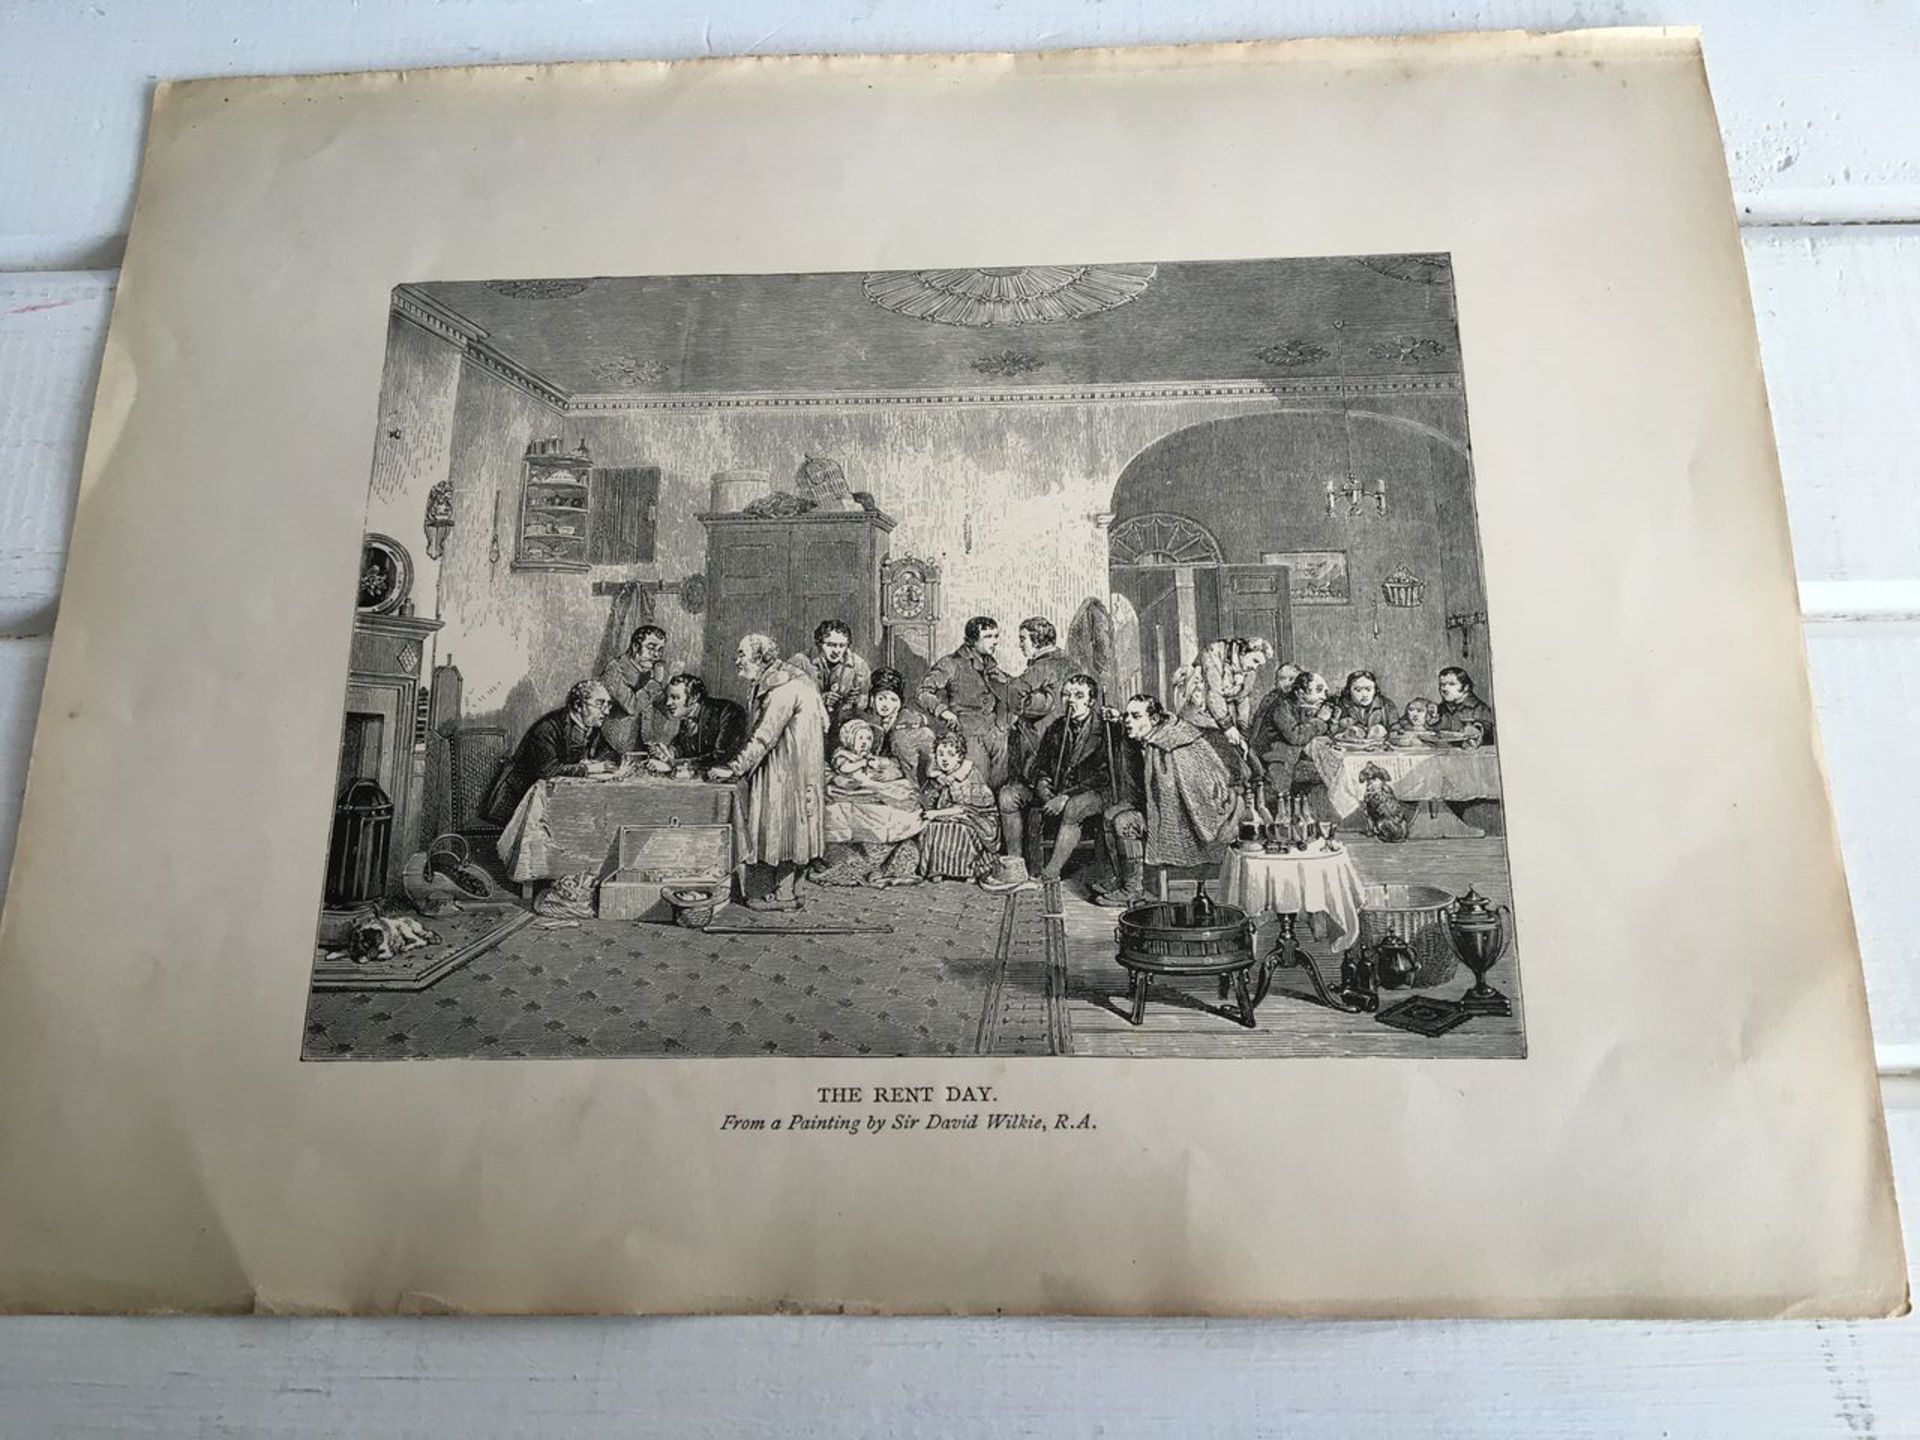 AN ENGRAVING c1900 OF A PAINTING BY SIR DAVID WILKIE (1785 - 1841). "THE RENT DAY". Engraved on